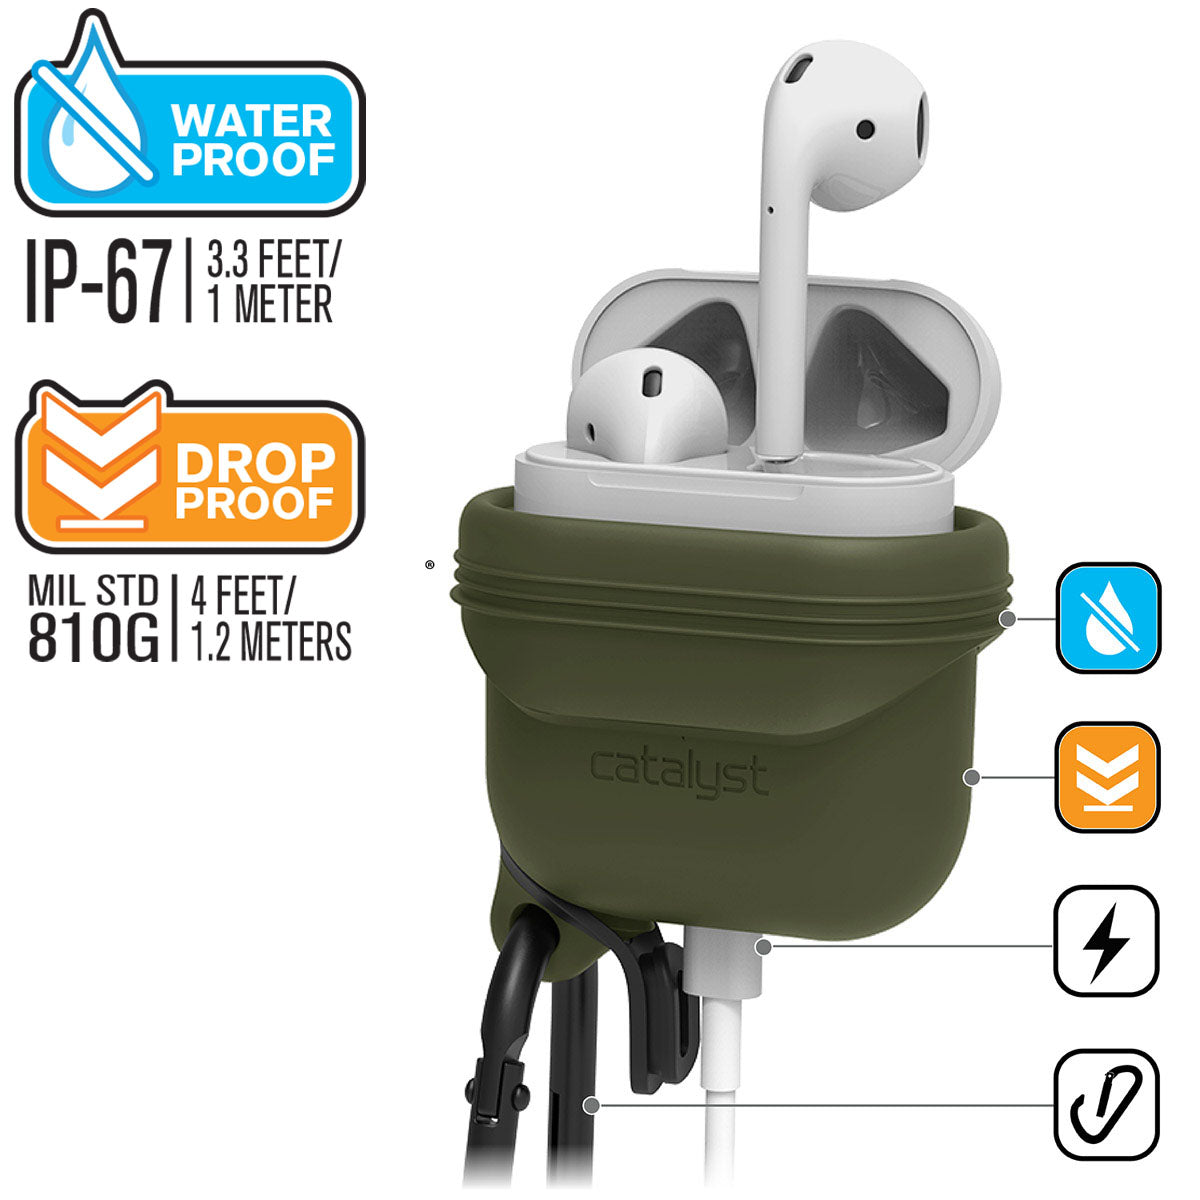 CATAPDGRN-FBA | Catalyst airpods gen2/1 waterproof case + carabiner showing the case drop proof and water proof features in army green text reads water proof IP-67 3.3 FEET/1 METER DROP PROOF MIL STD 810G 1.2 METERS 